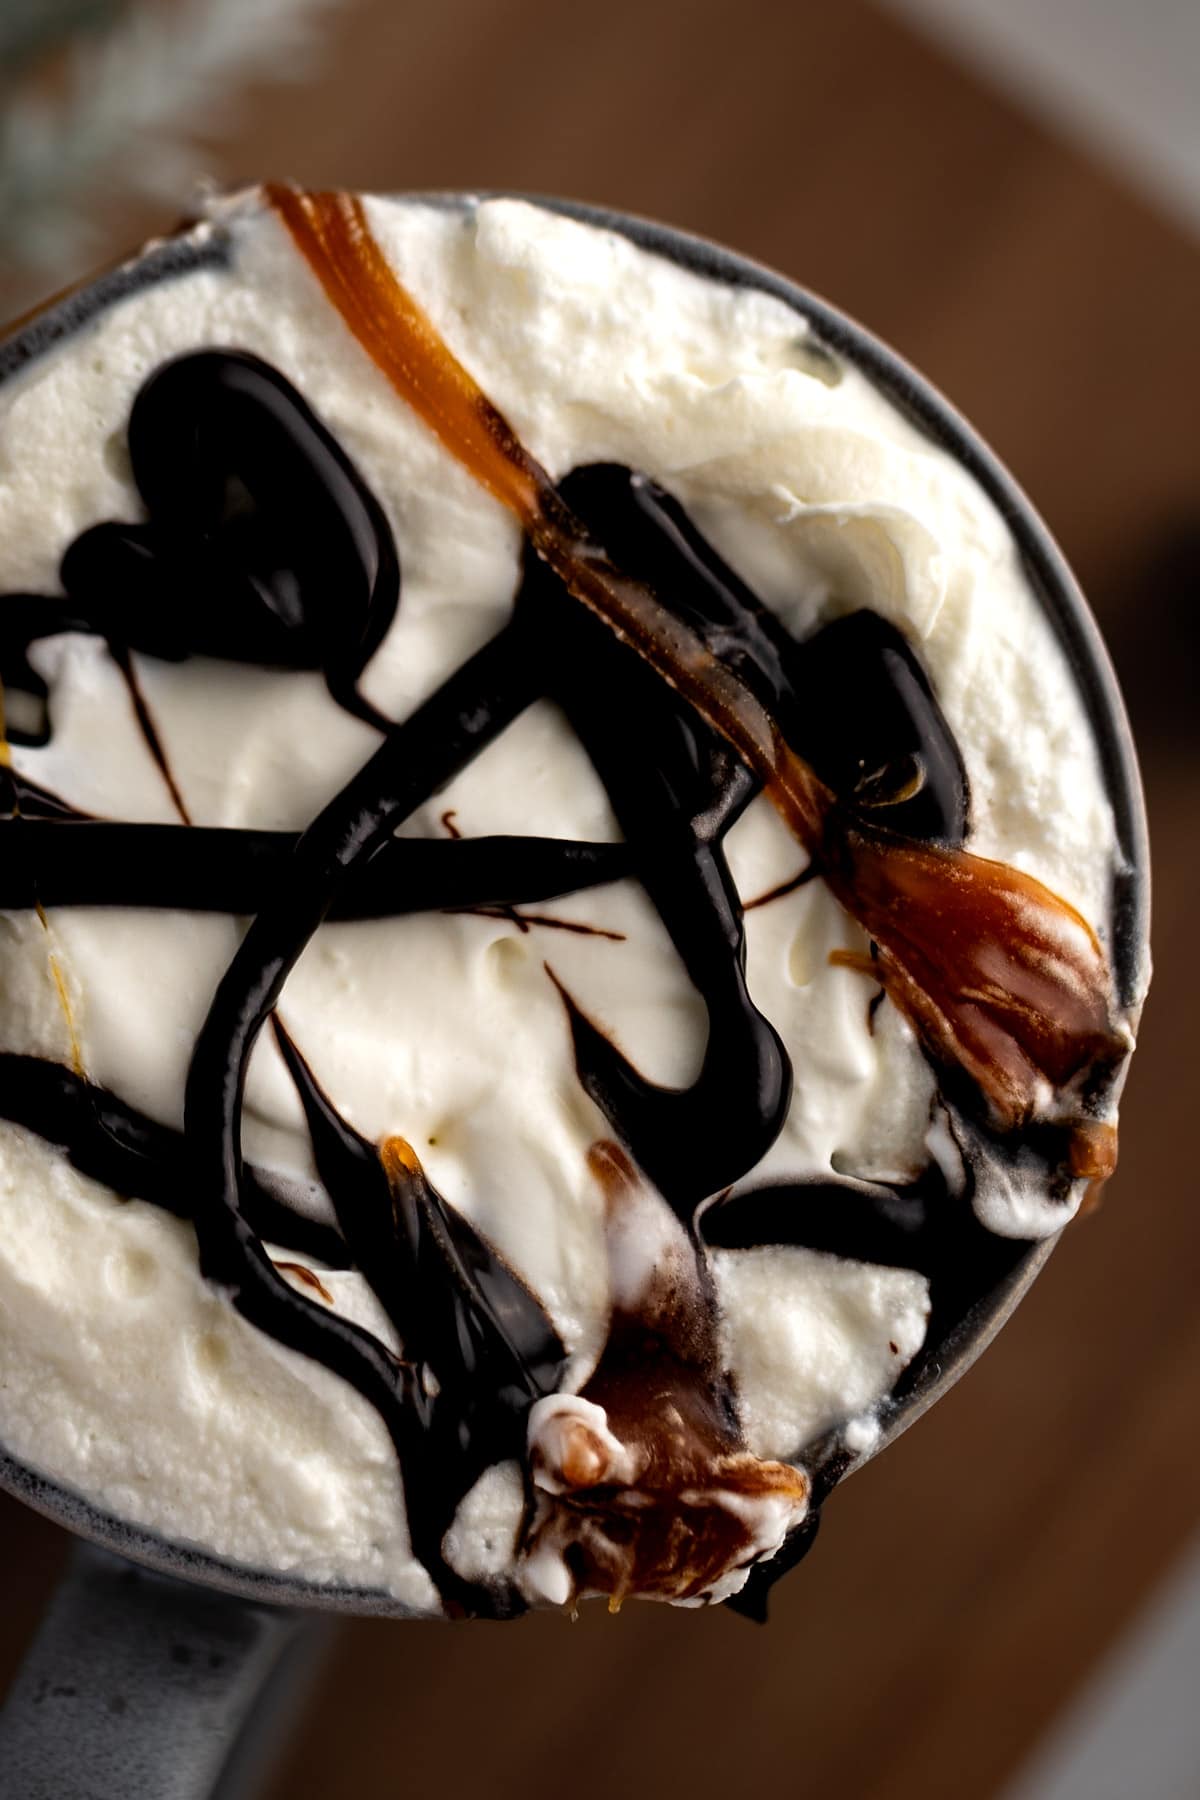 Close up view of a salted caramel mocha with chocolate sauce and salted caramel syrup drizzled on top.